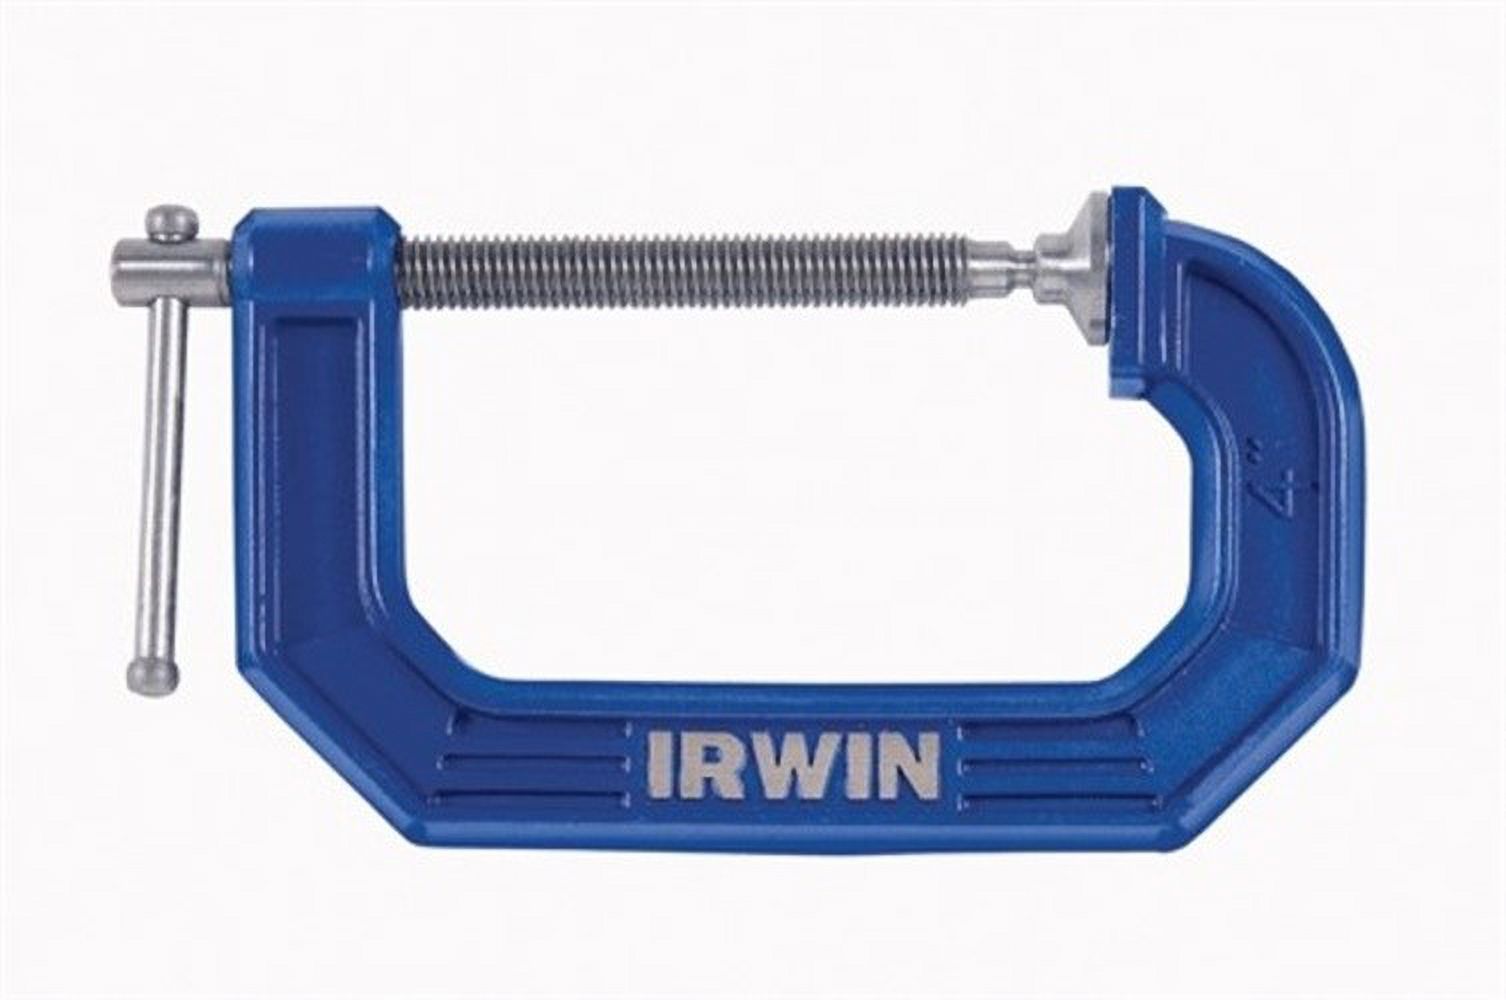 IRWIN 225104 C-Clamp, 900 lb Clamping, 4 in Max Opening Size, 3 in D Throat, Steel Body, Blue Body - image 3 of 3